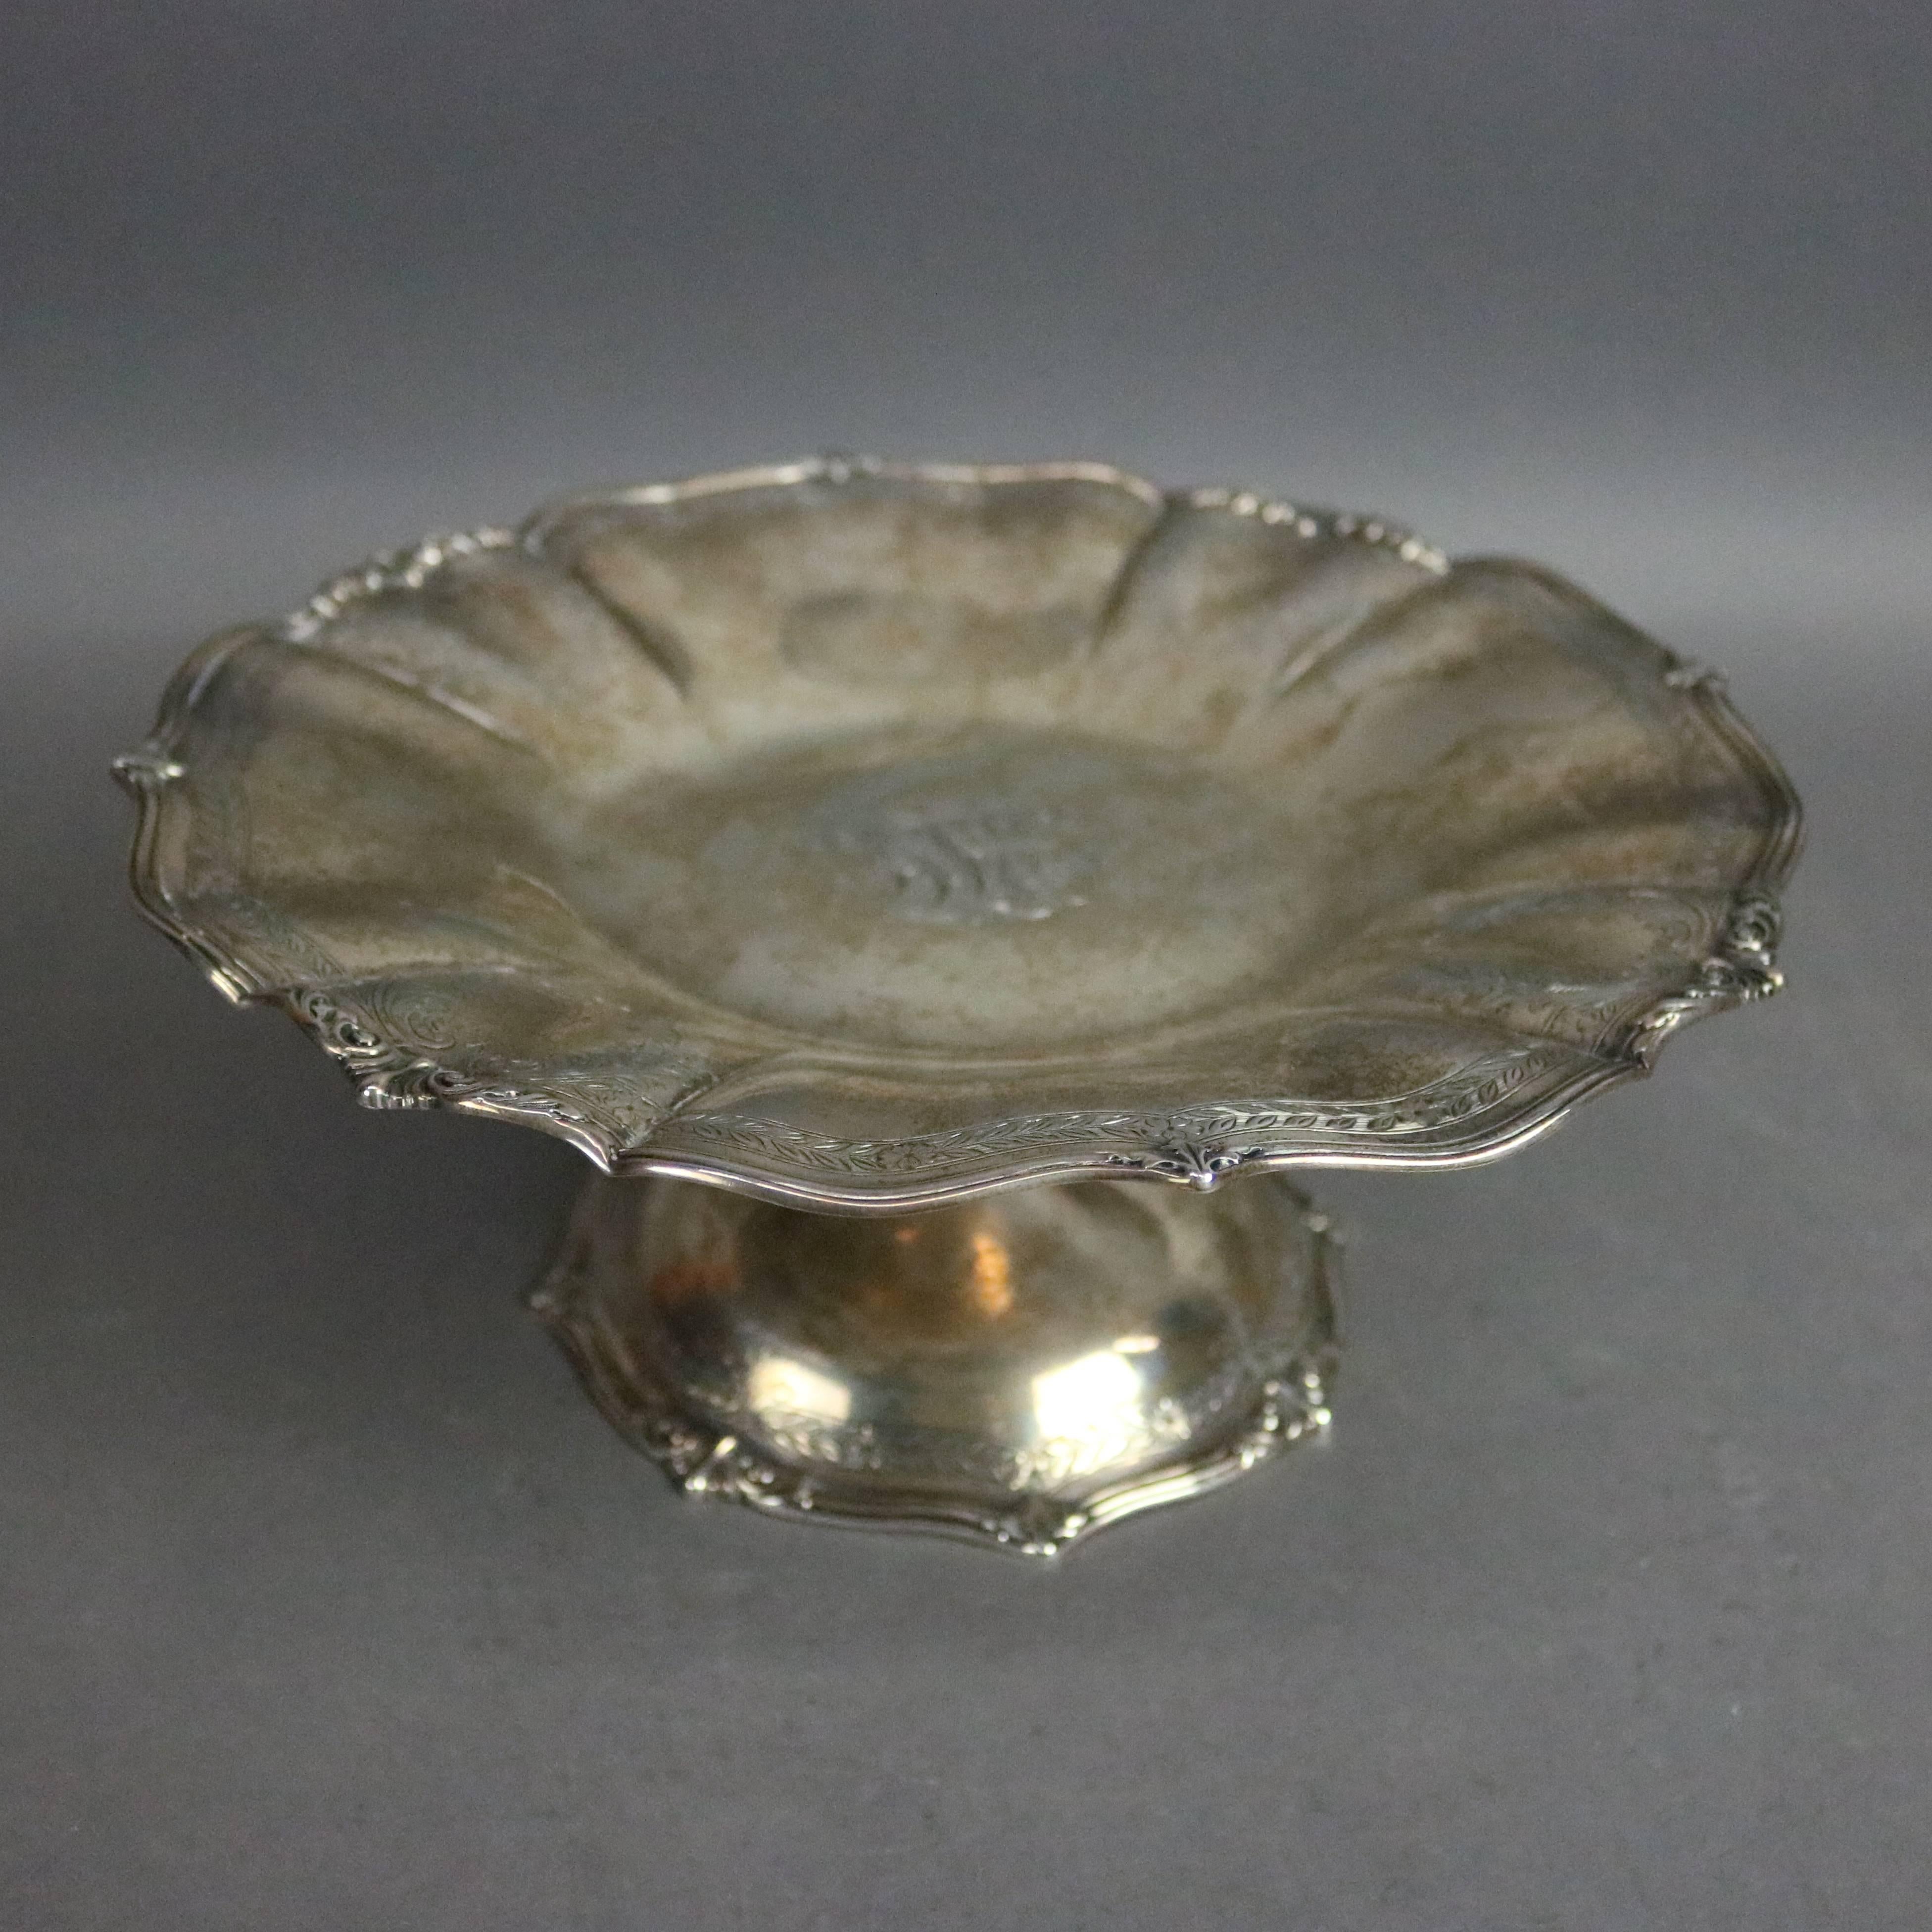 Antique sterling silver compote by The Frank Herschede Co. features scalloped edges with foliate decoration, central monogram BLE, circa 1880


Measures: 5